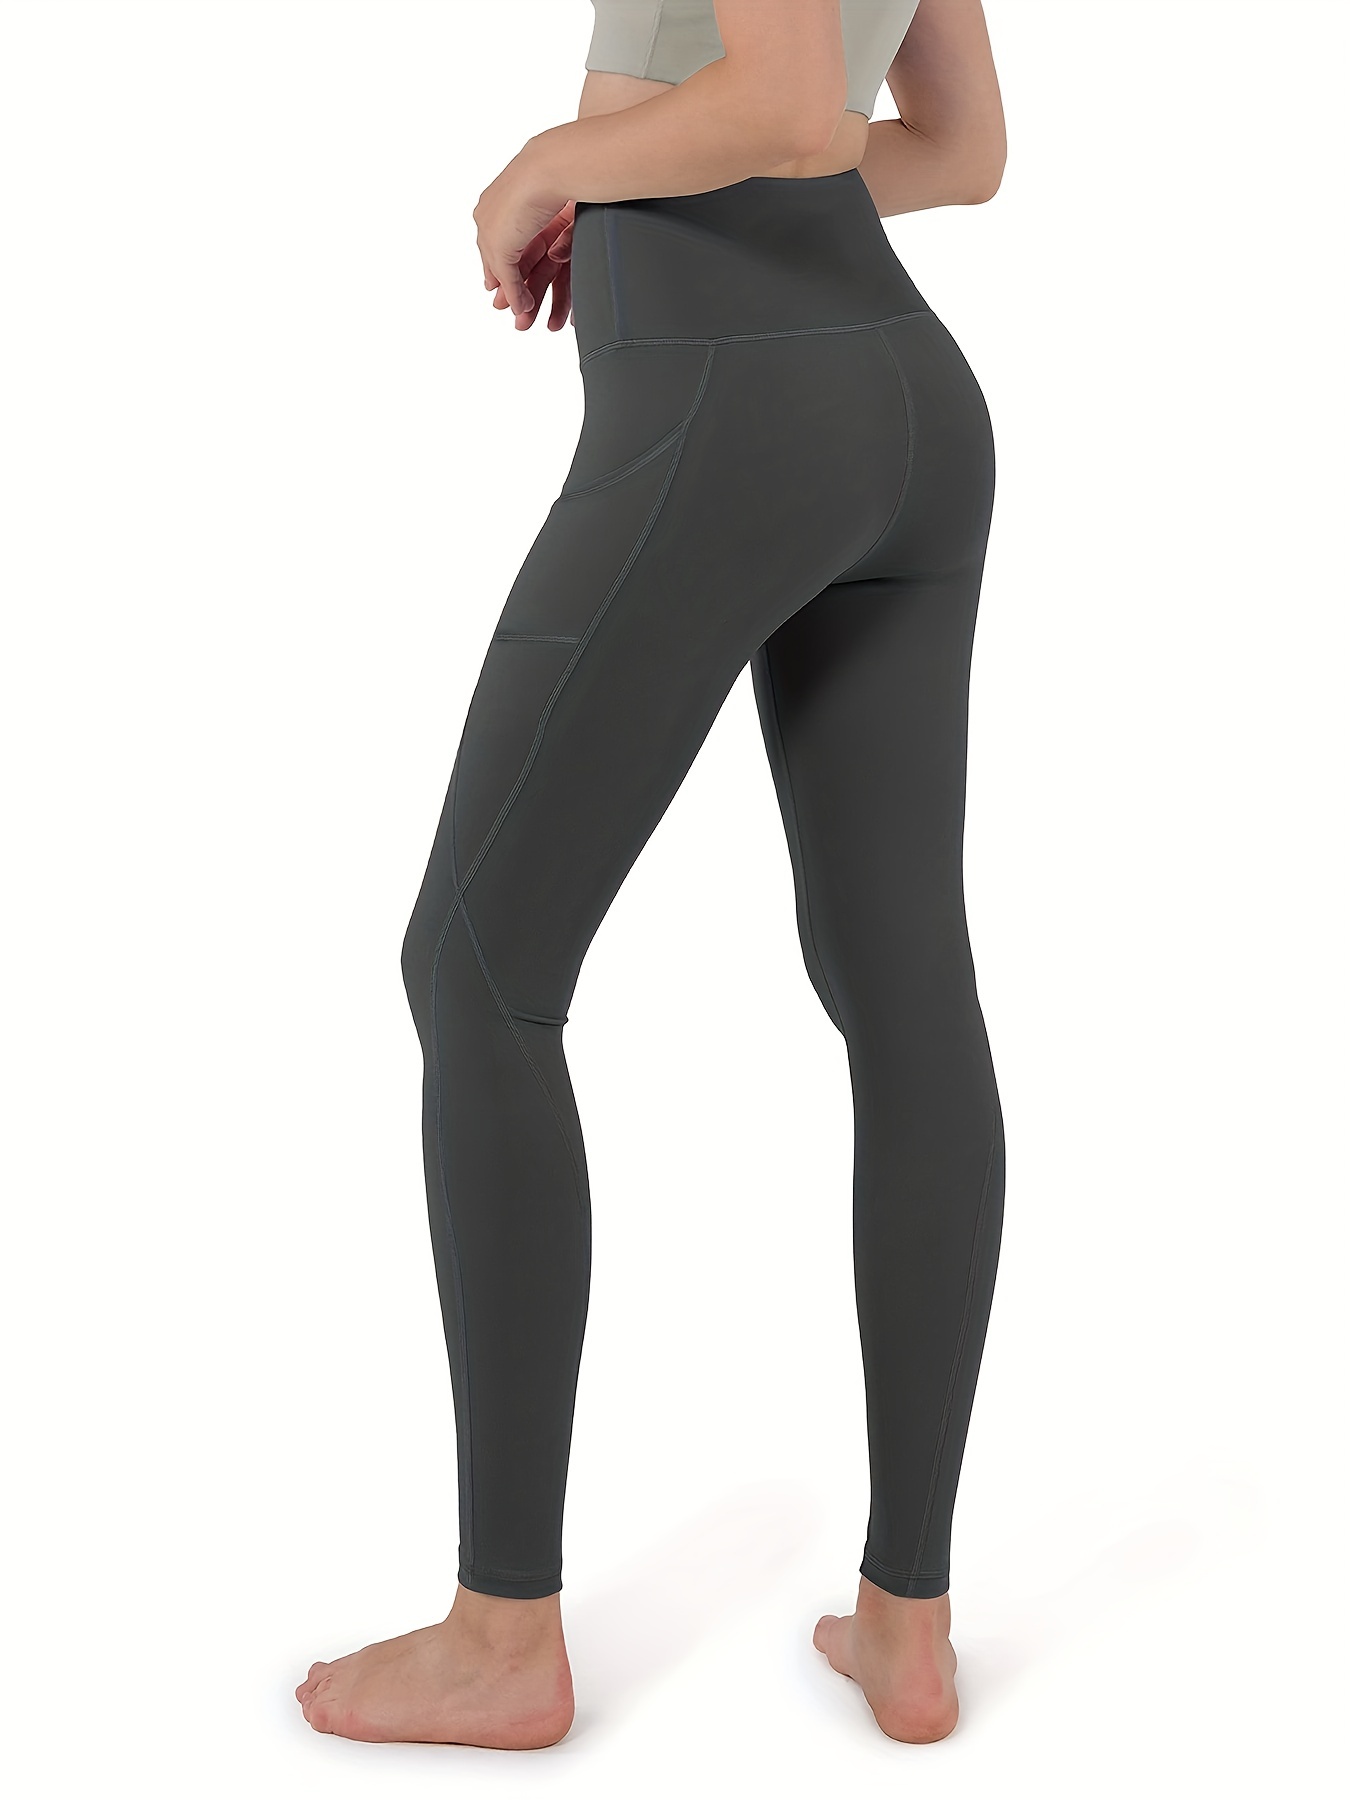 Activewear Leggings for Women, High Waisted Yoga Pants with Pockets, Tummy  Control Workout Full Length Leggings